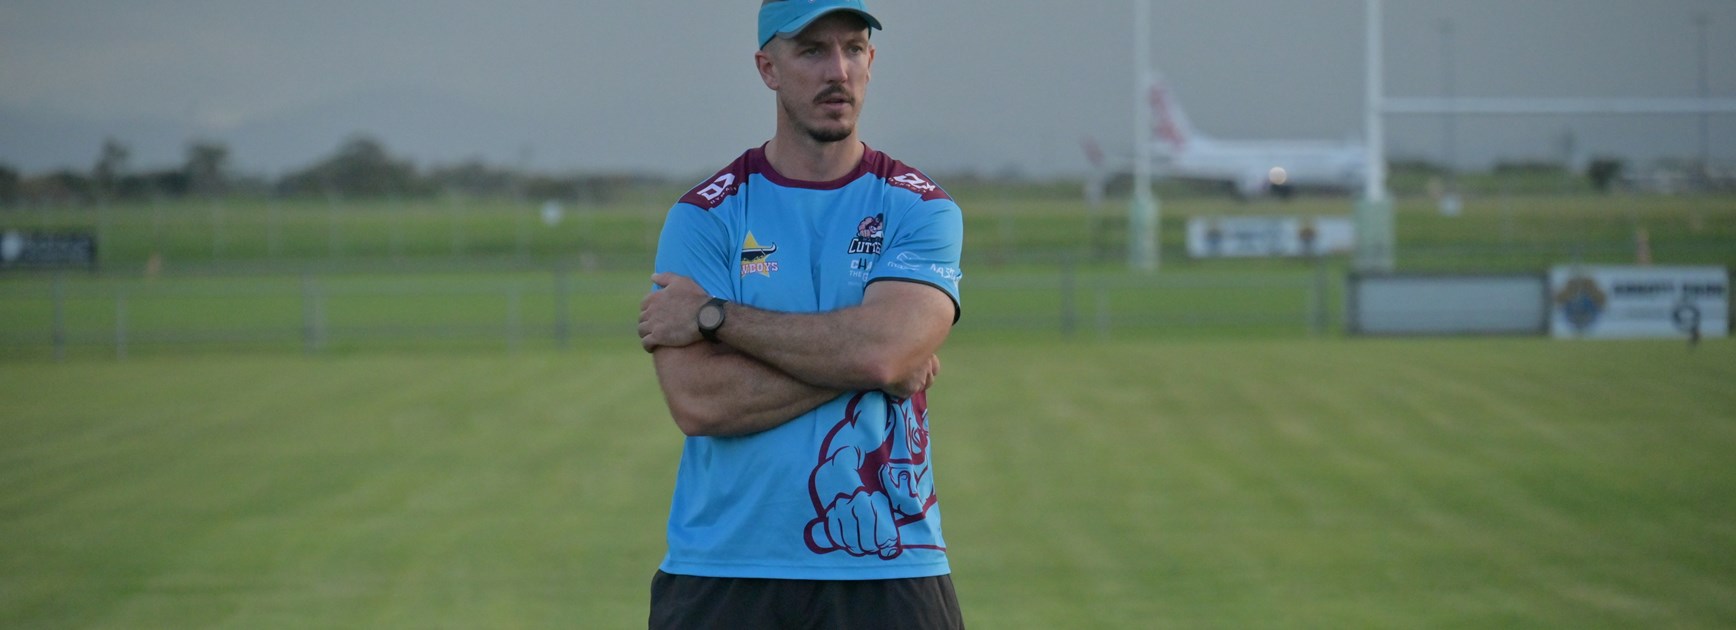 Cutters announce past player as new Cup coach